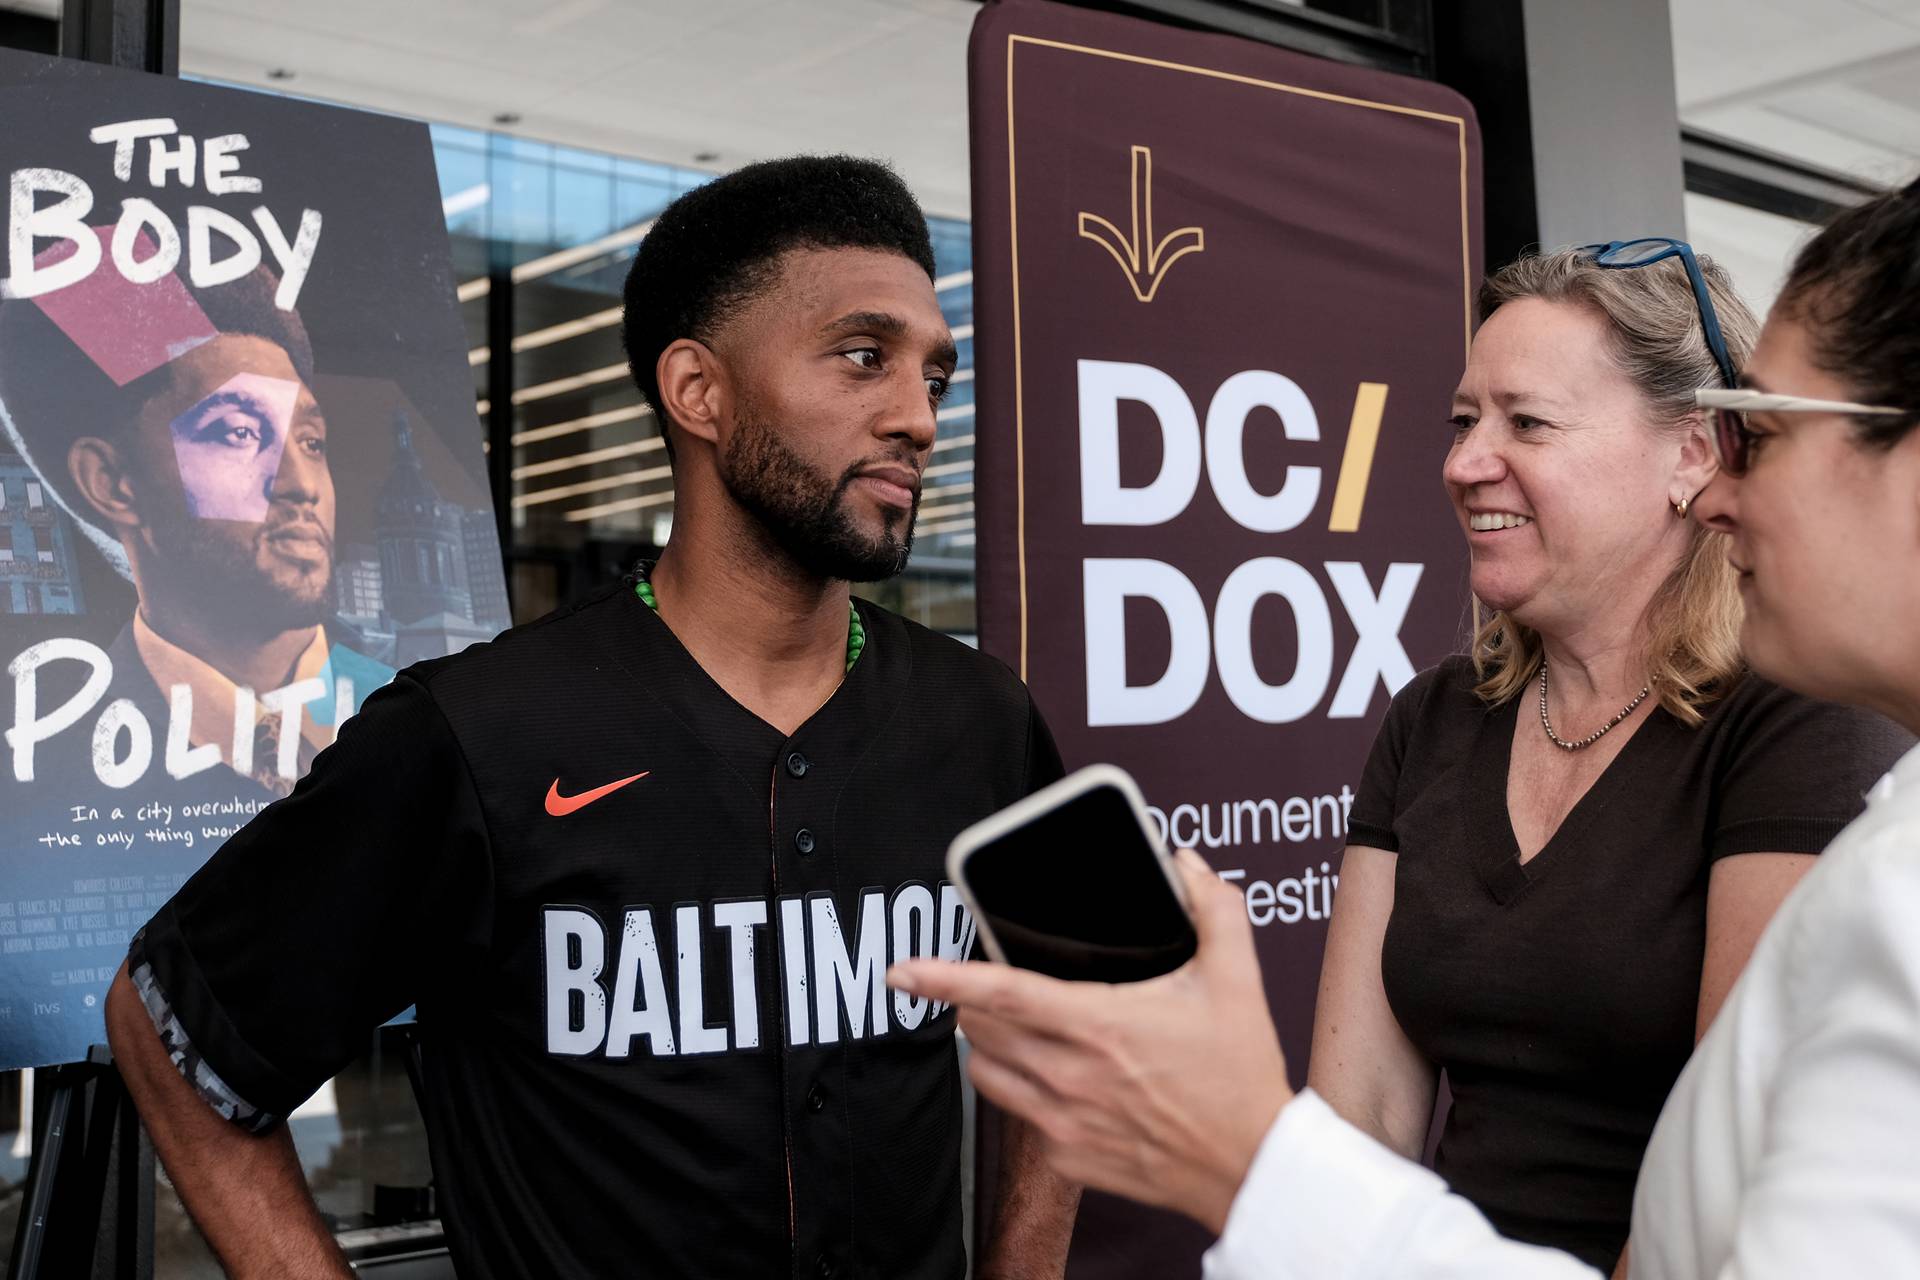 Baltimore Mayor Brandon Scott at the screening of his new documentary The Body Politic at the DC/DOX Film Festival 2023 on June 18, 2023 in Washington, D.C.  At 37, Scott is the youngest Mayor in the history of Baltimore.